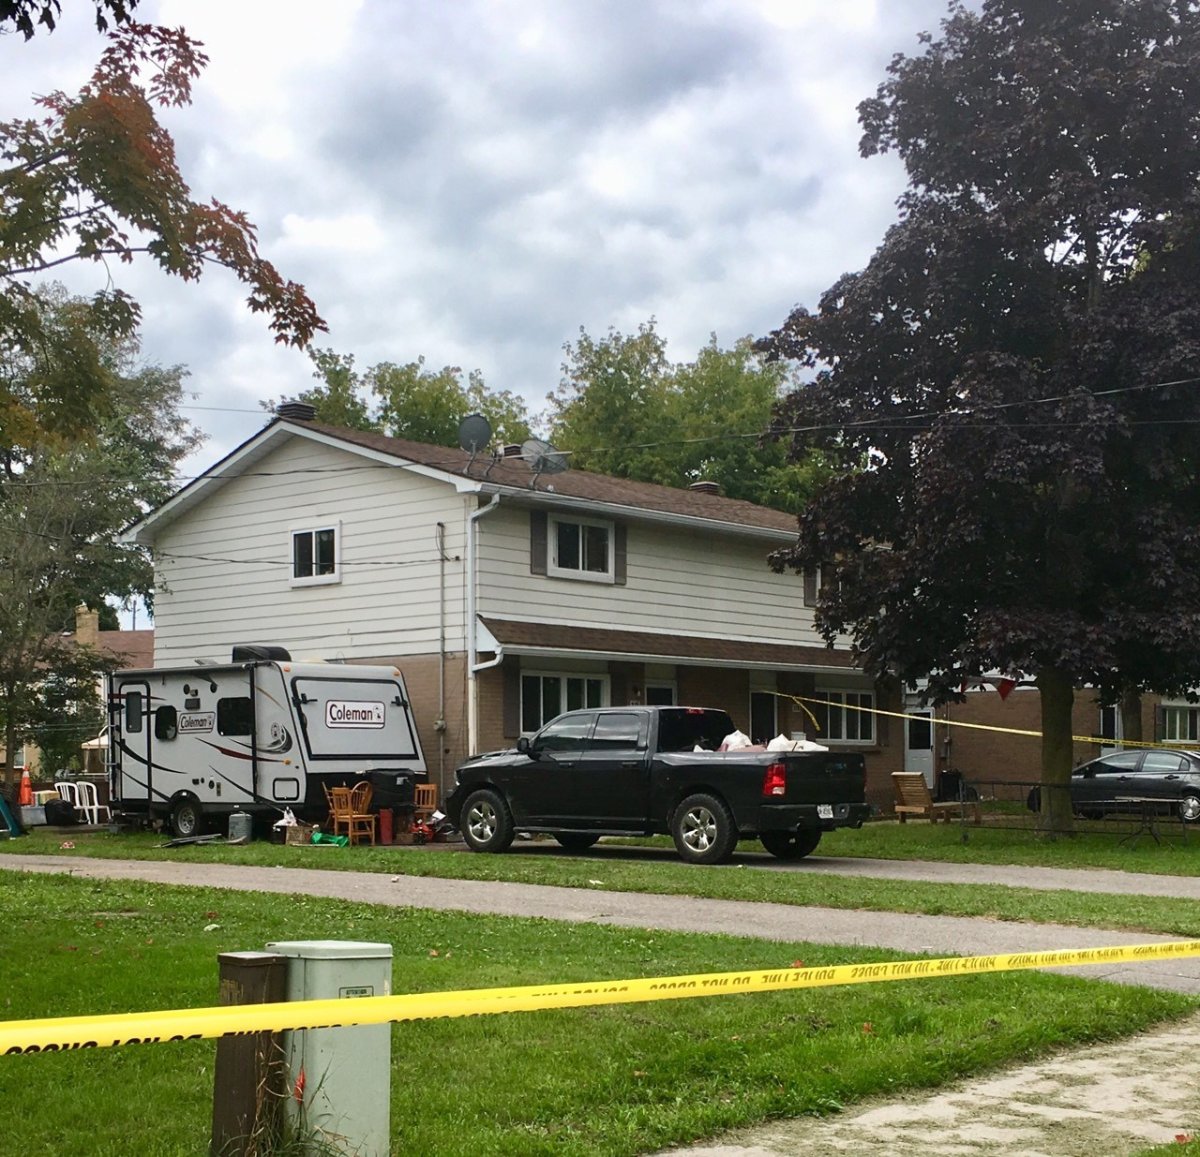 Cobourg police continue to investigate an early morning stabbing.